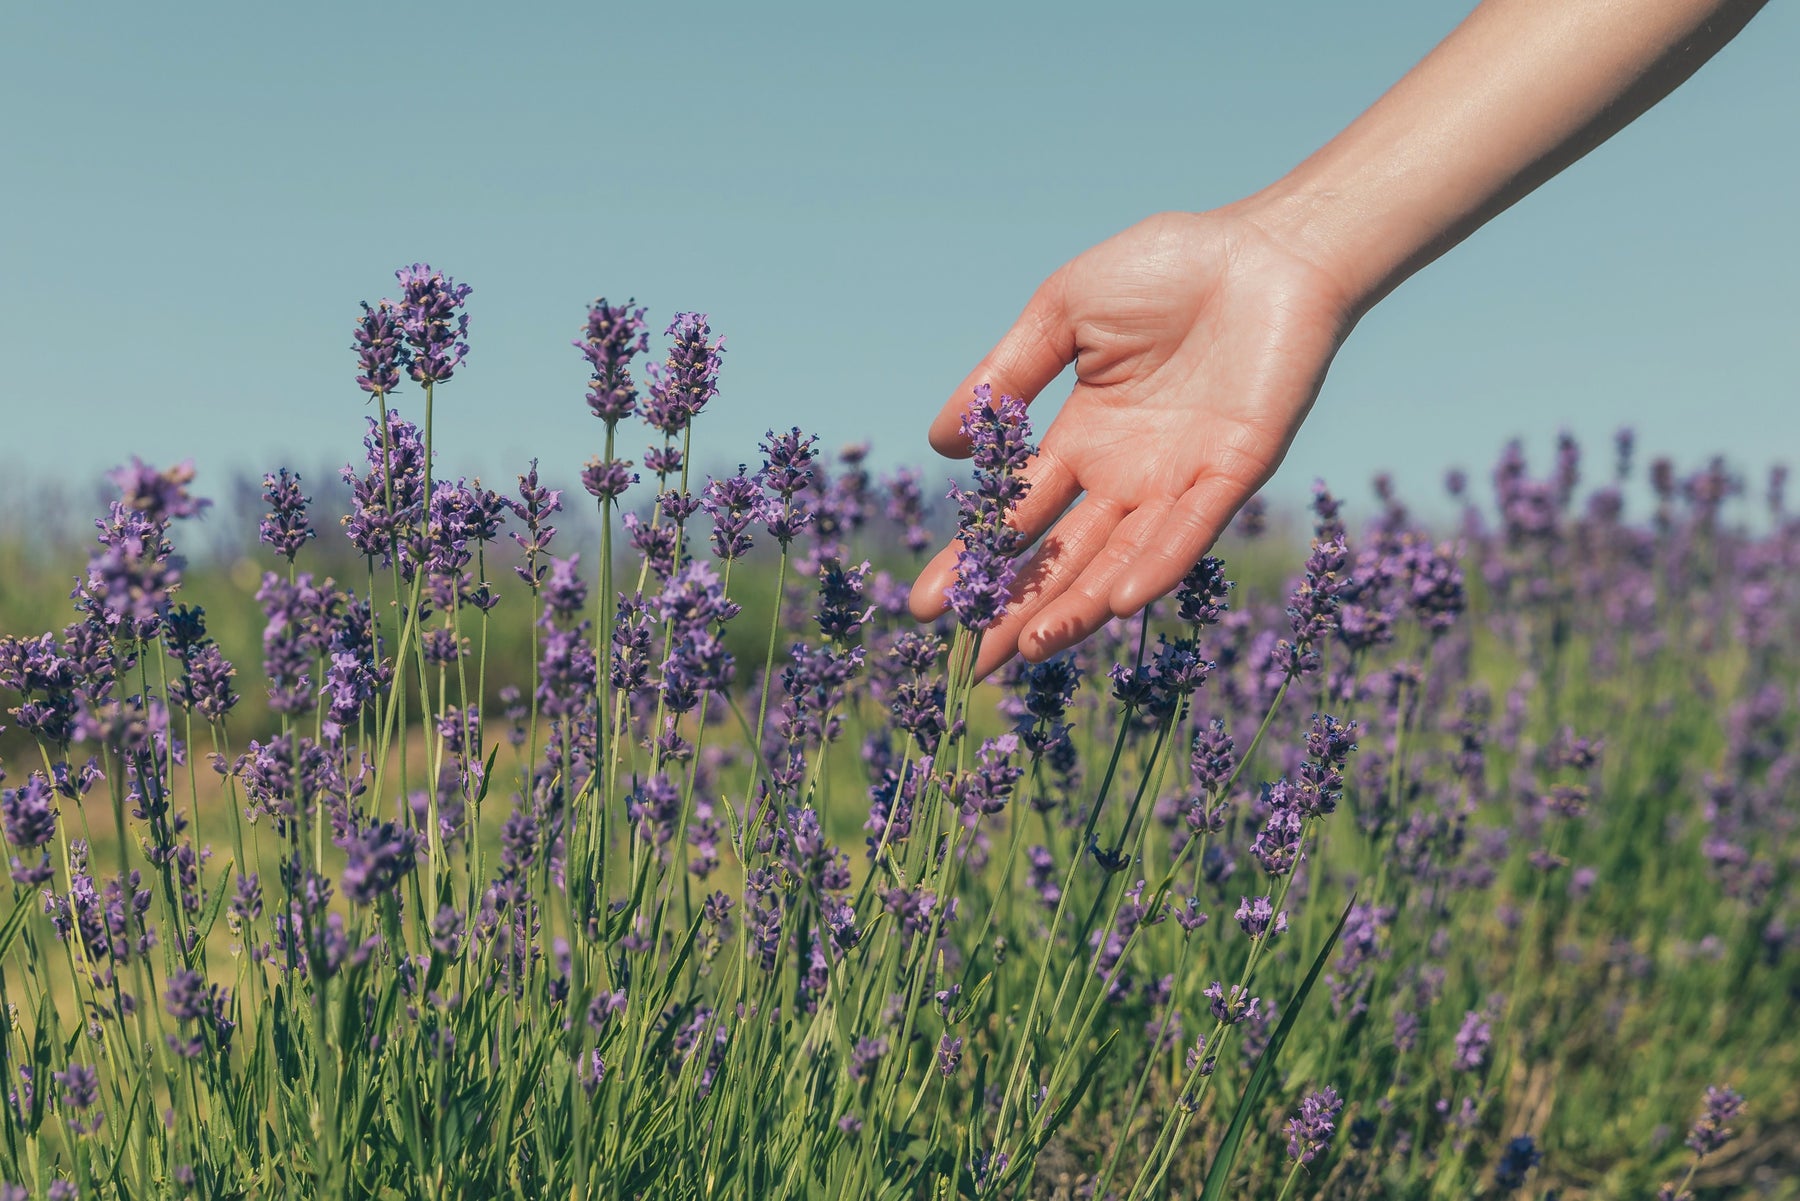 A hand stretching out to gently cradle purple lavender flowers sticking up from the lush green grass below.